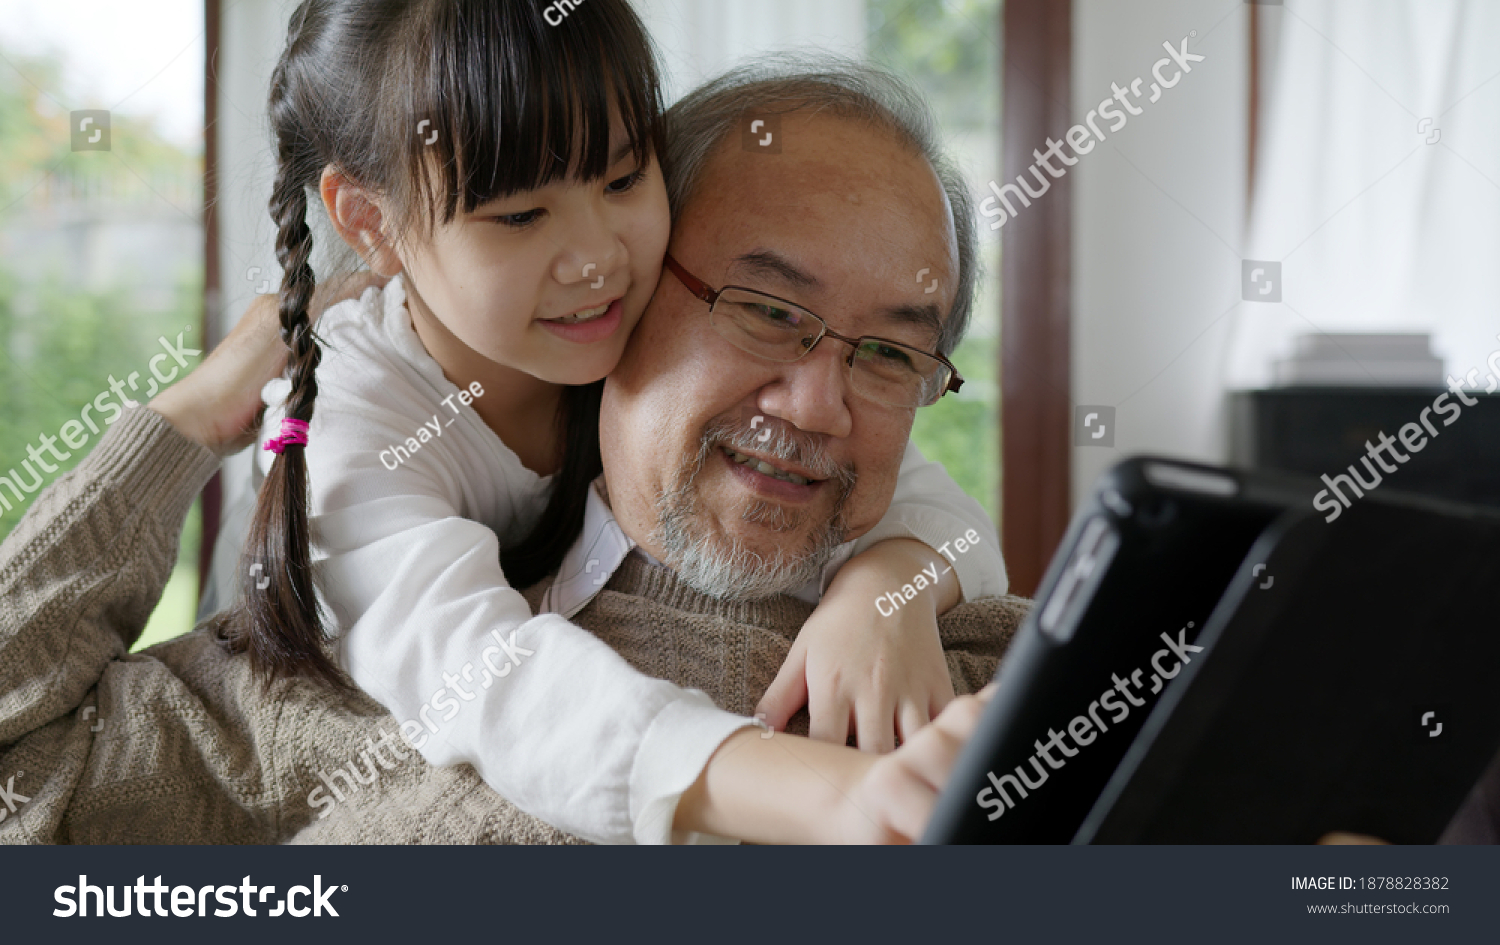 Candid of old senior asian grandparent play and watch with kid grandchildren with technology on computer tablet at home in bonding relationship in family. Young girl hug older man from back. #1878828382